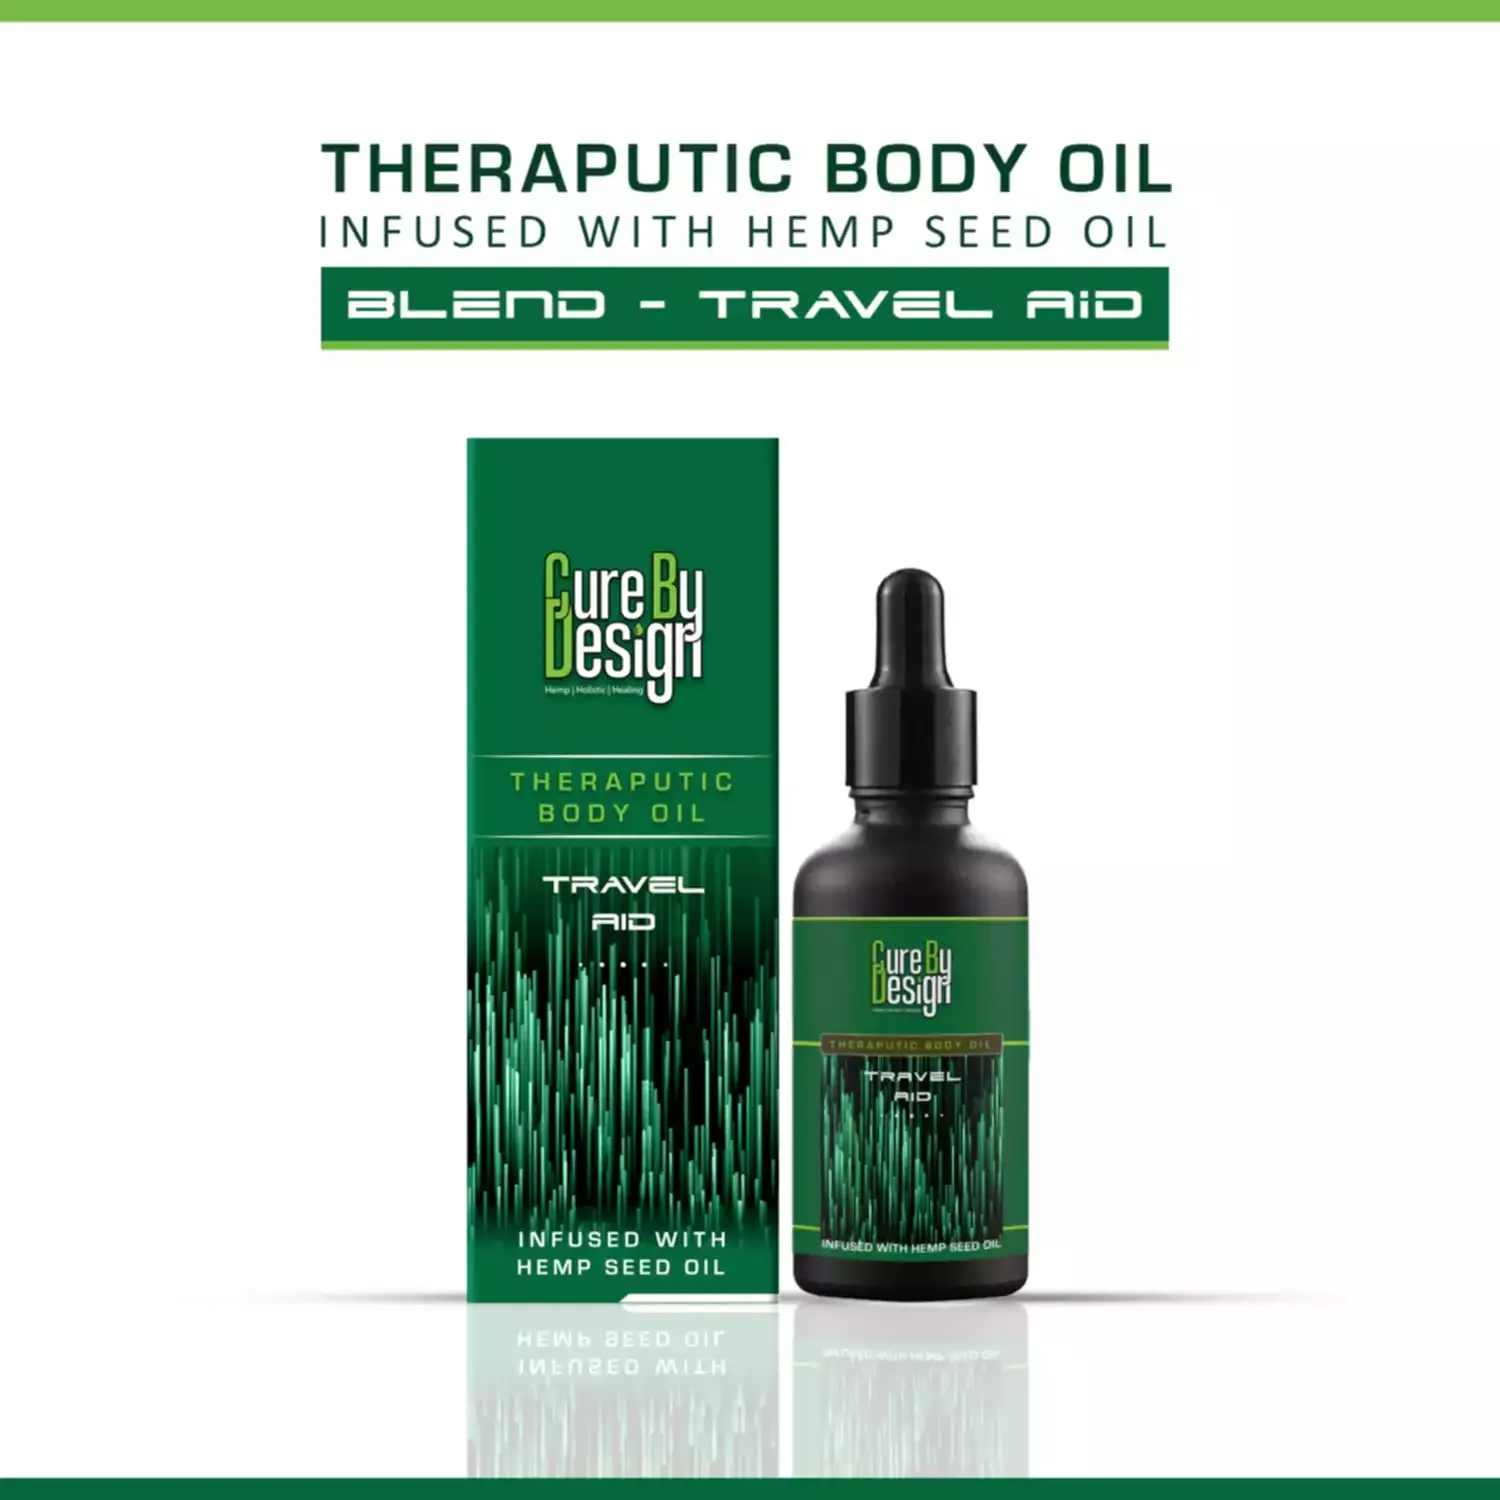 Cure By Design Therapeutic Healing Blend - Travel Aid 30ml